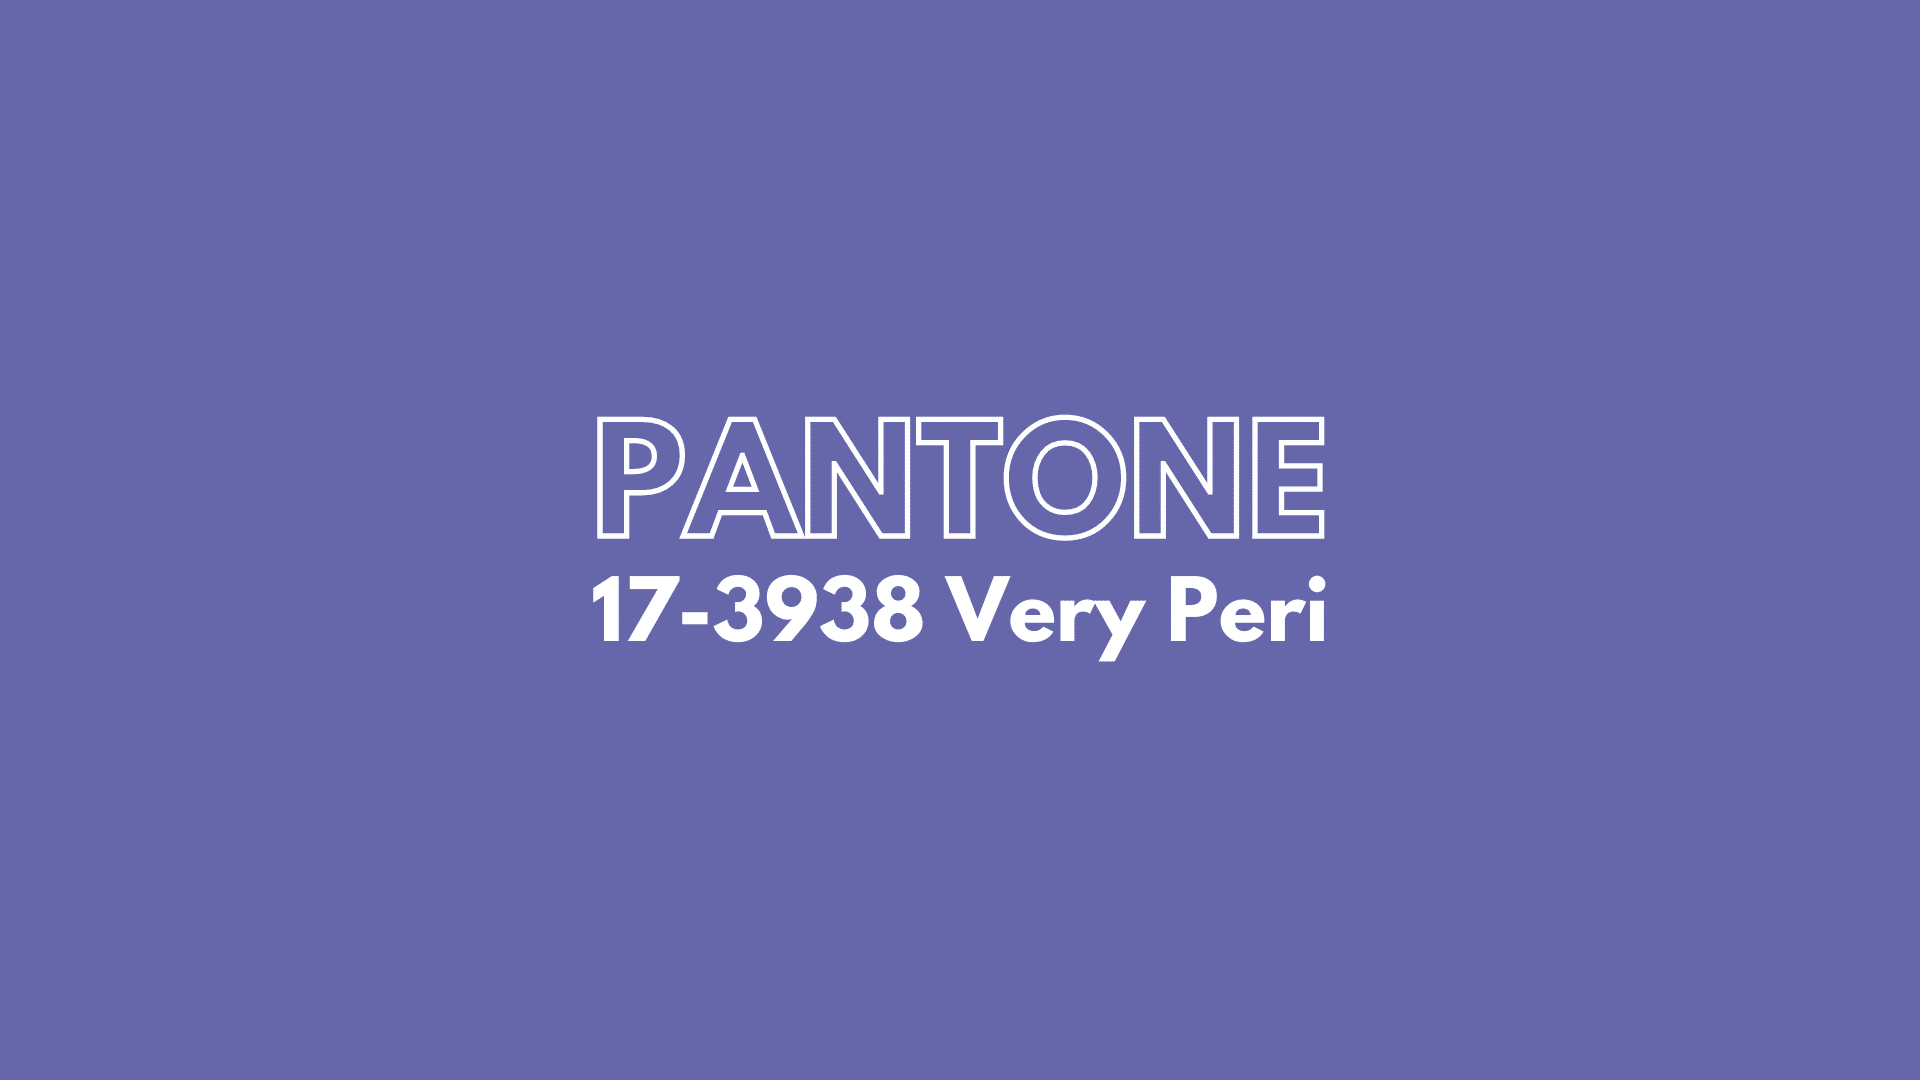 Very Peri: how will you use Pantone’s Colour of the Year 2022?